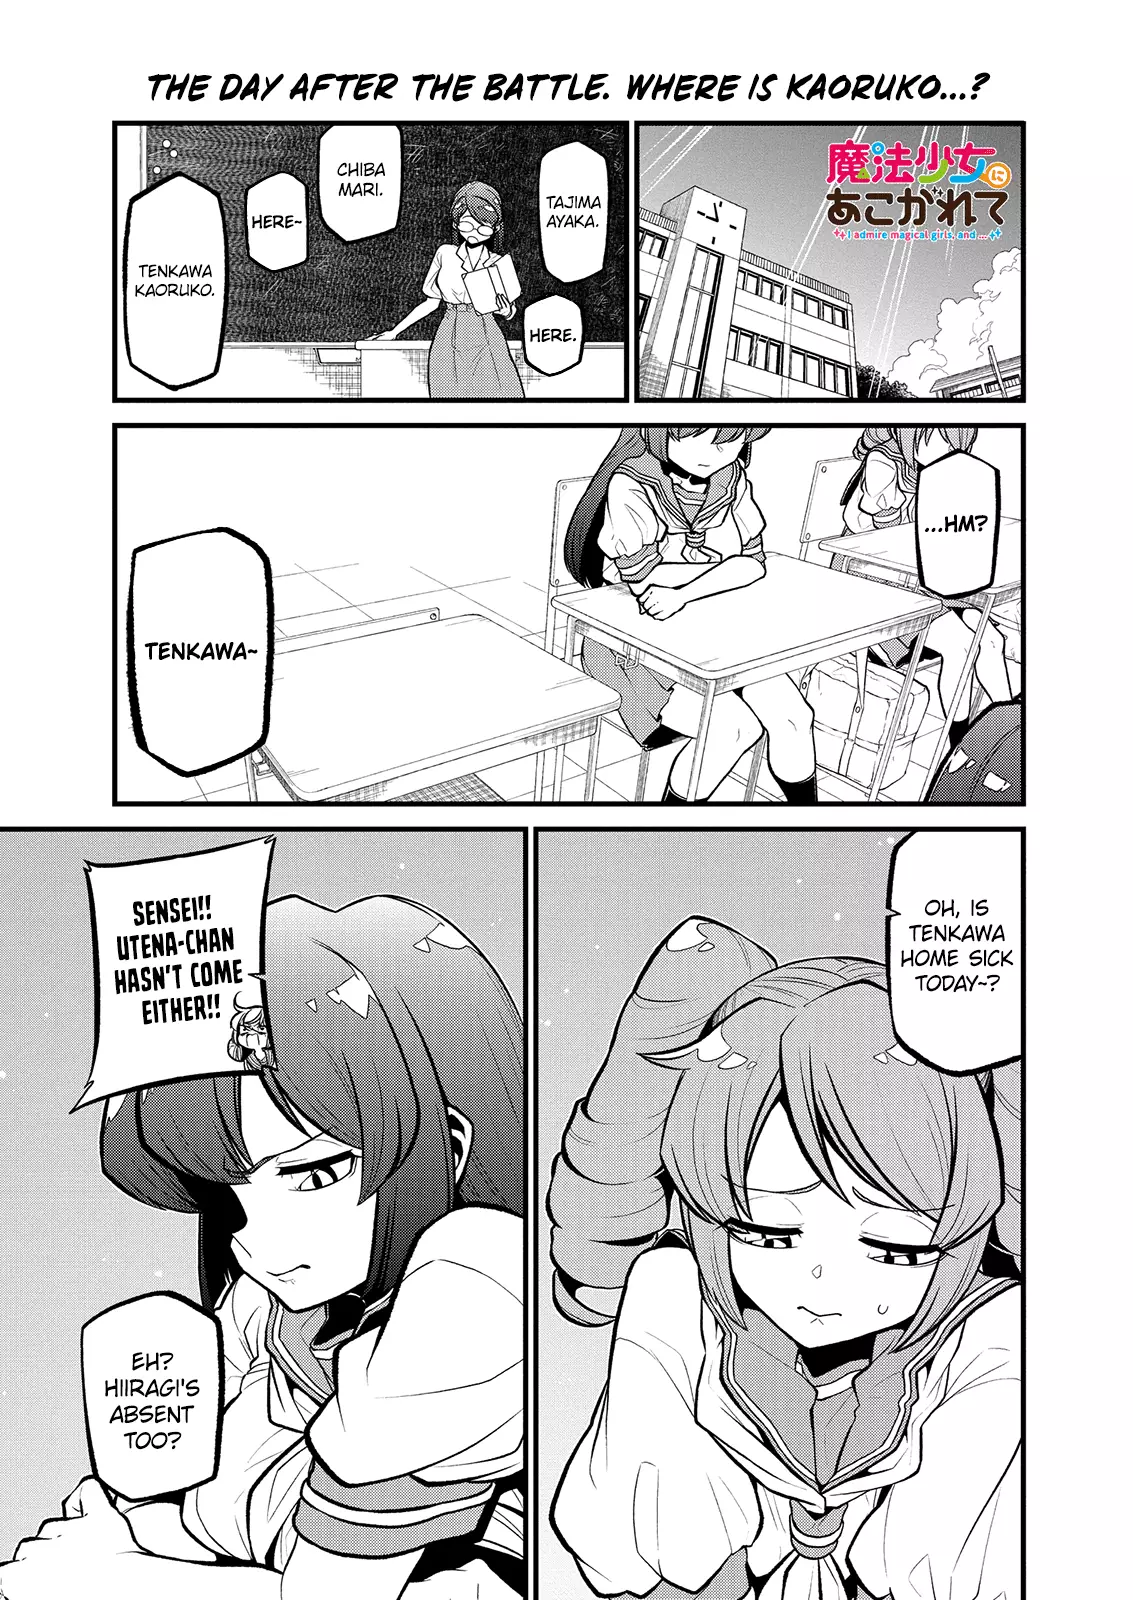 Looking Up To Magical Girls - 30 page 1